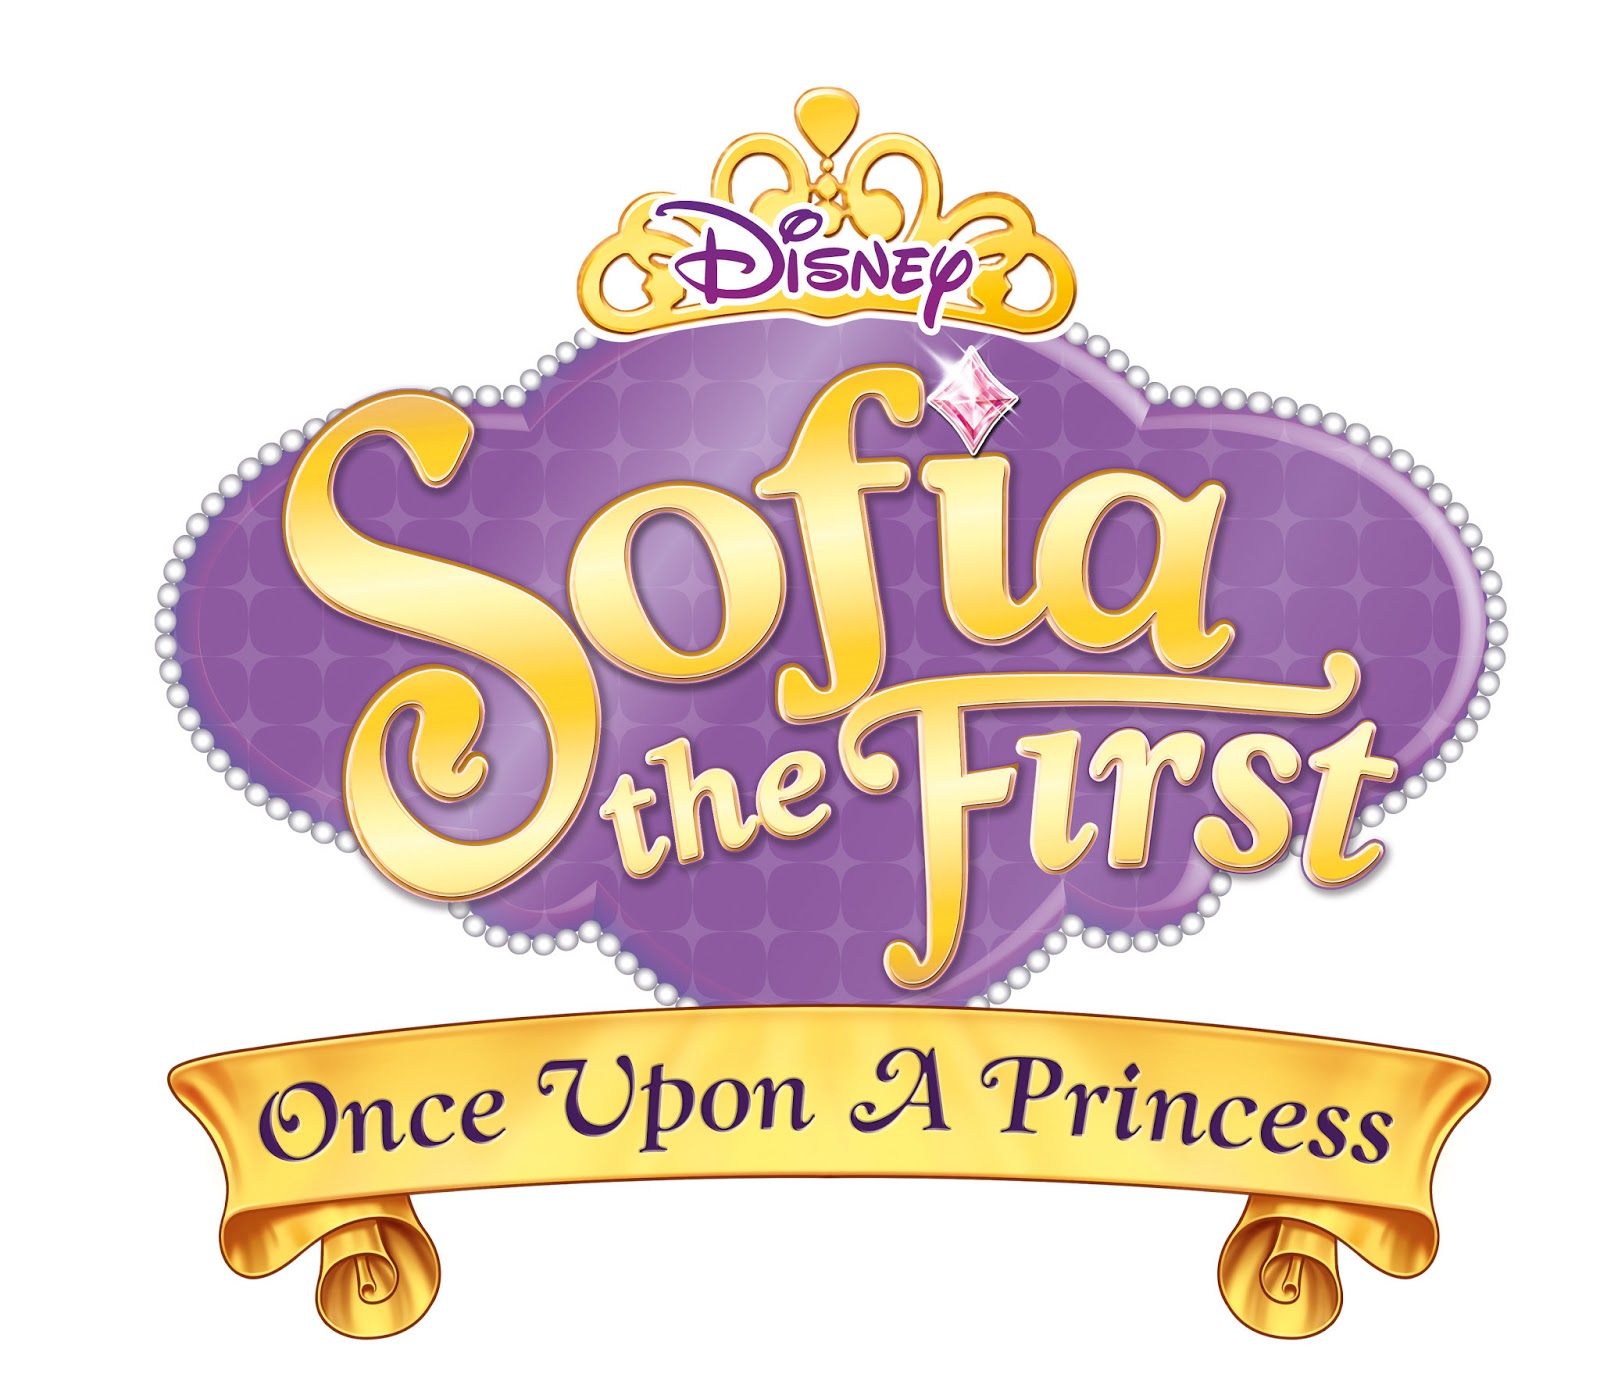 Sofia The First: Once Upon A Princess Backgrounds, Compatible - PC, Mobile, Gadgets| 1600x1381 px